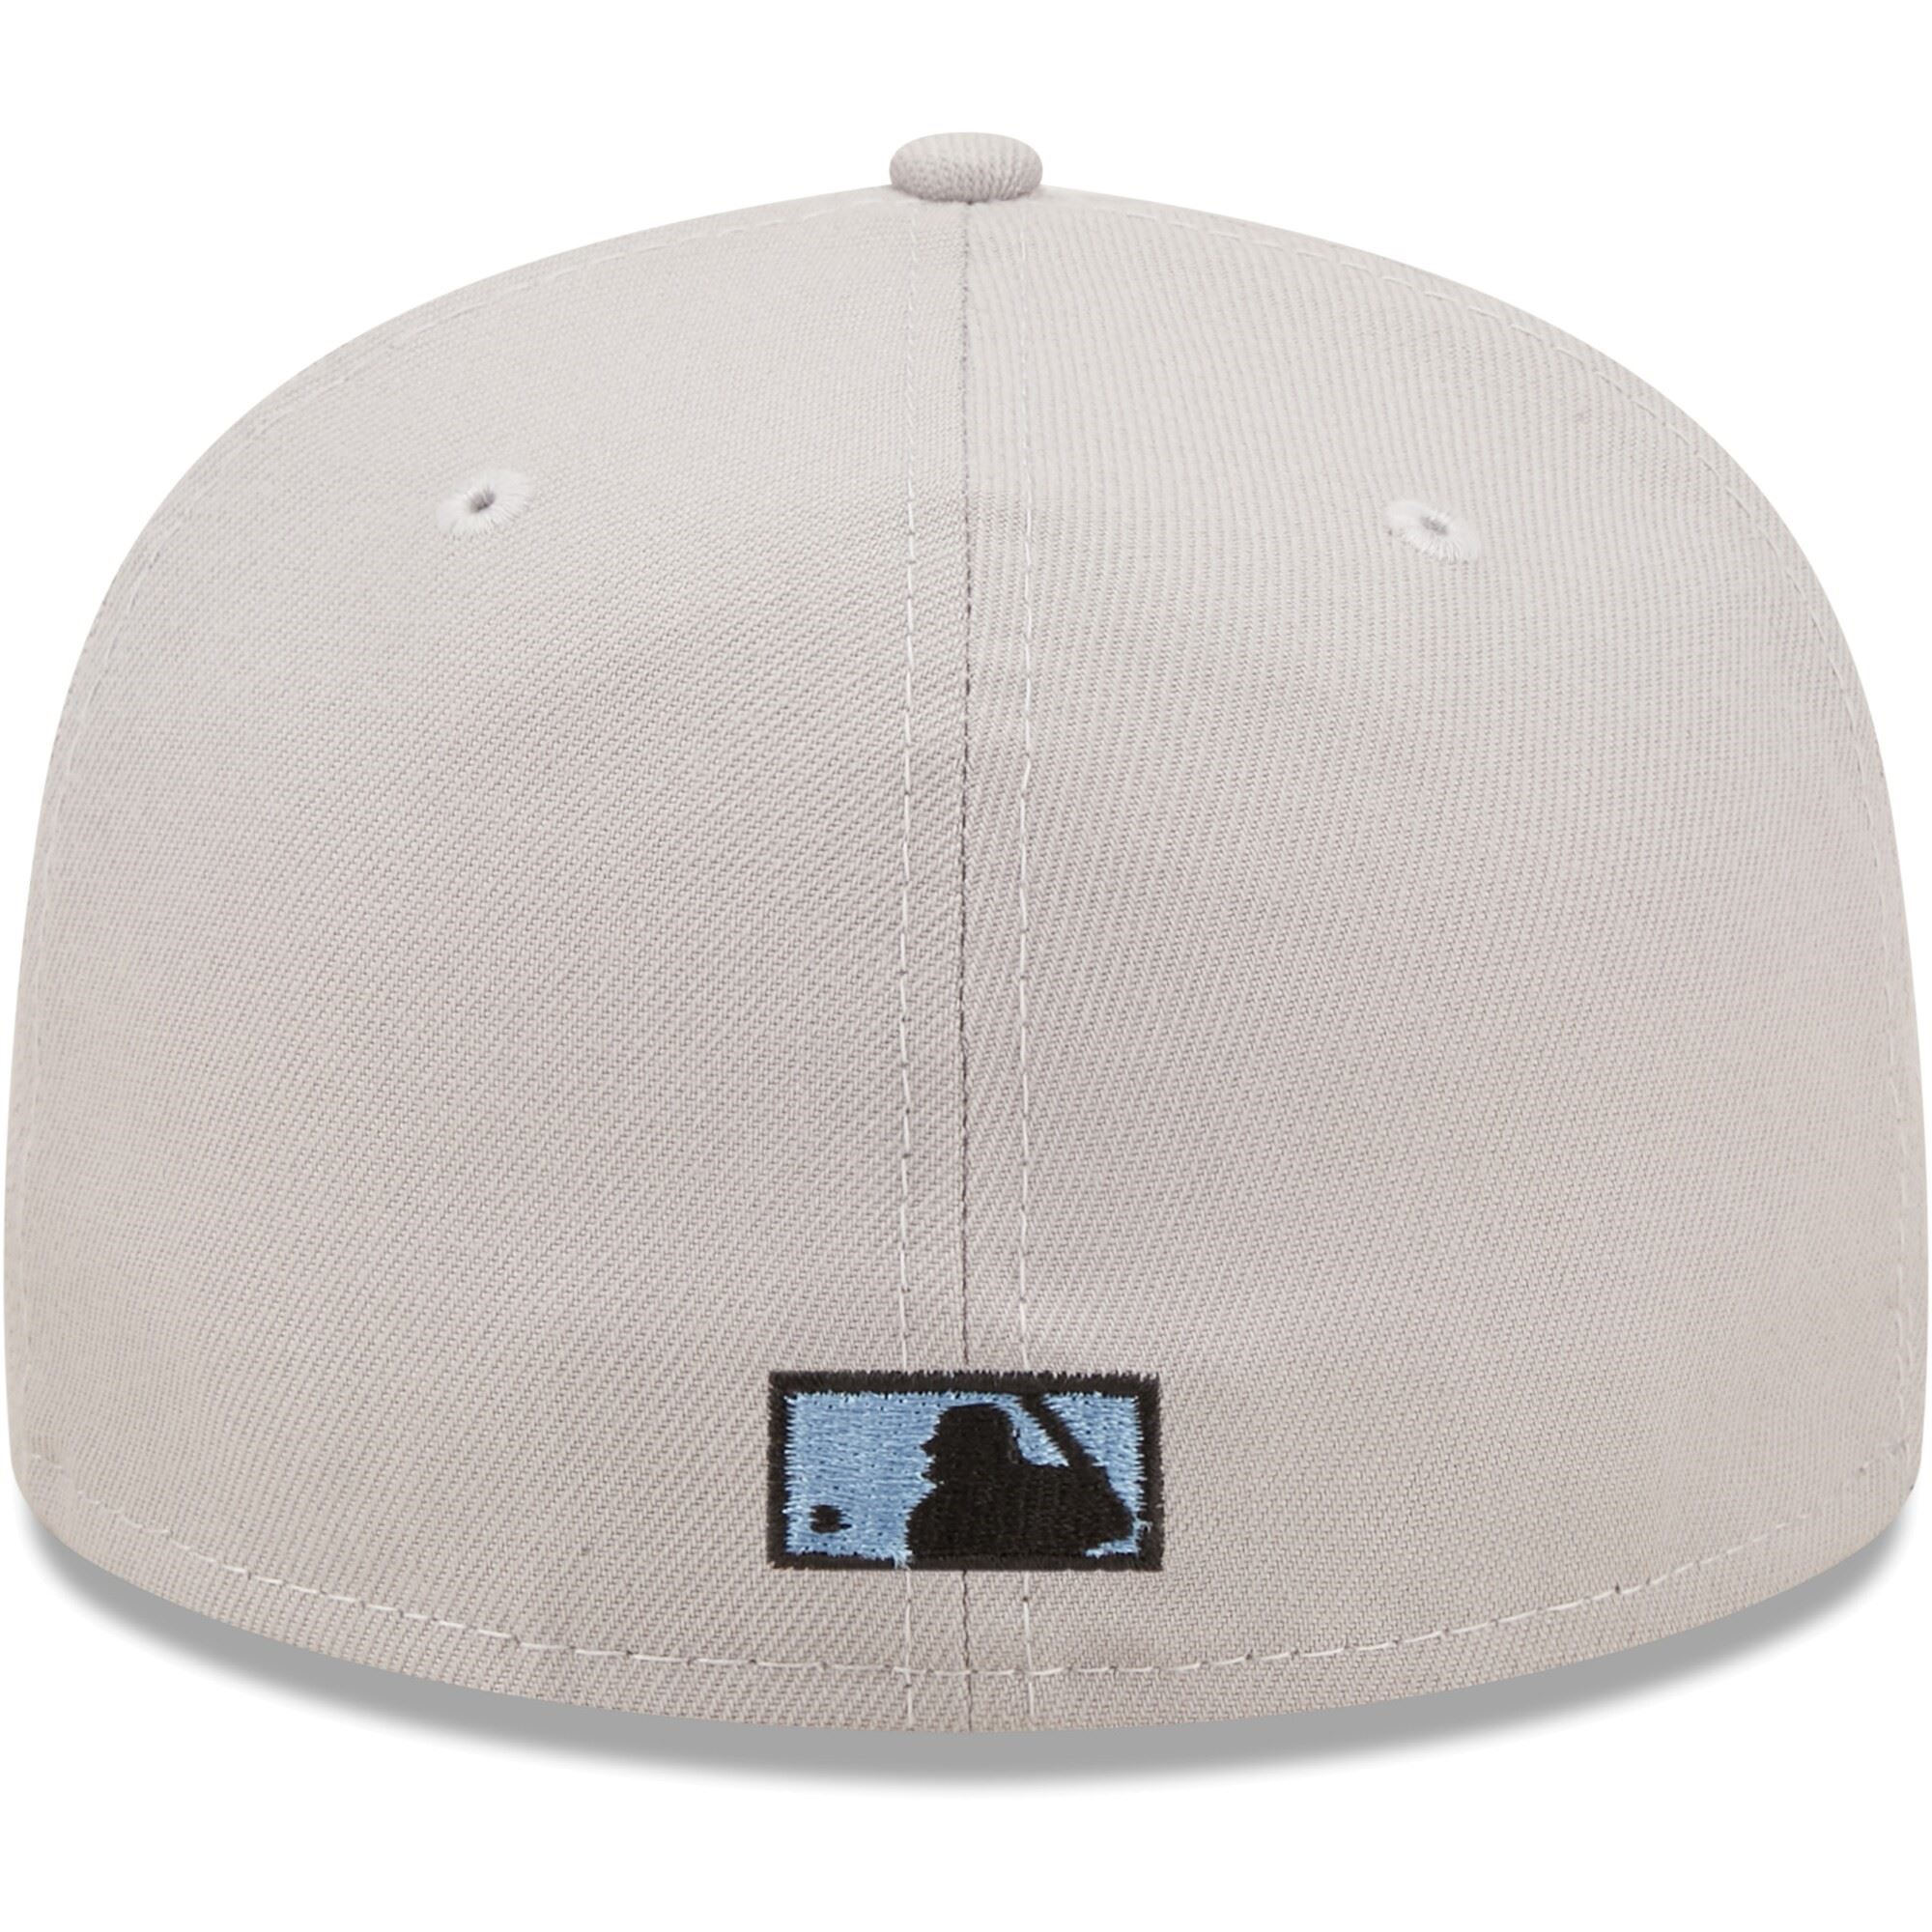 Oakland Athletics MLB Cooperstown 40th Anniversary Sidepatch Grey Black Royal 59Fifty Basecap New Era